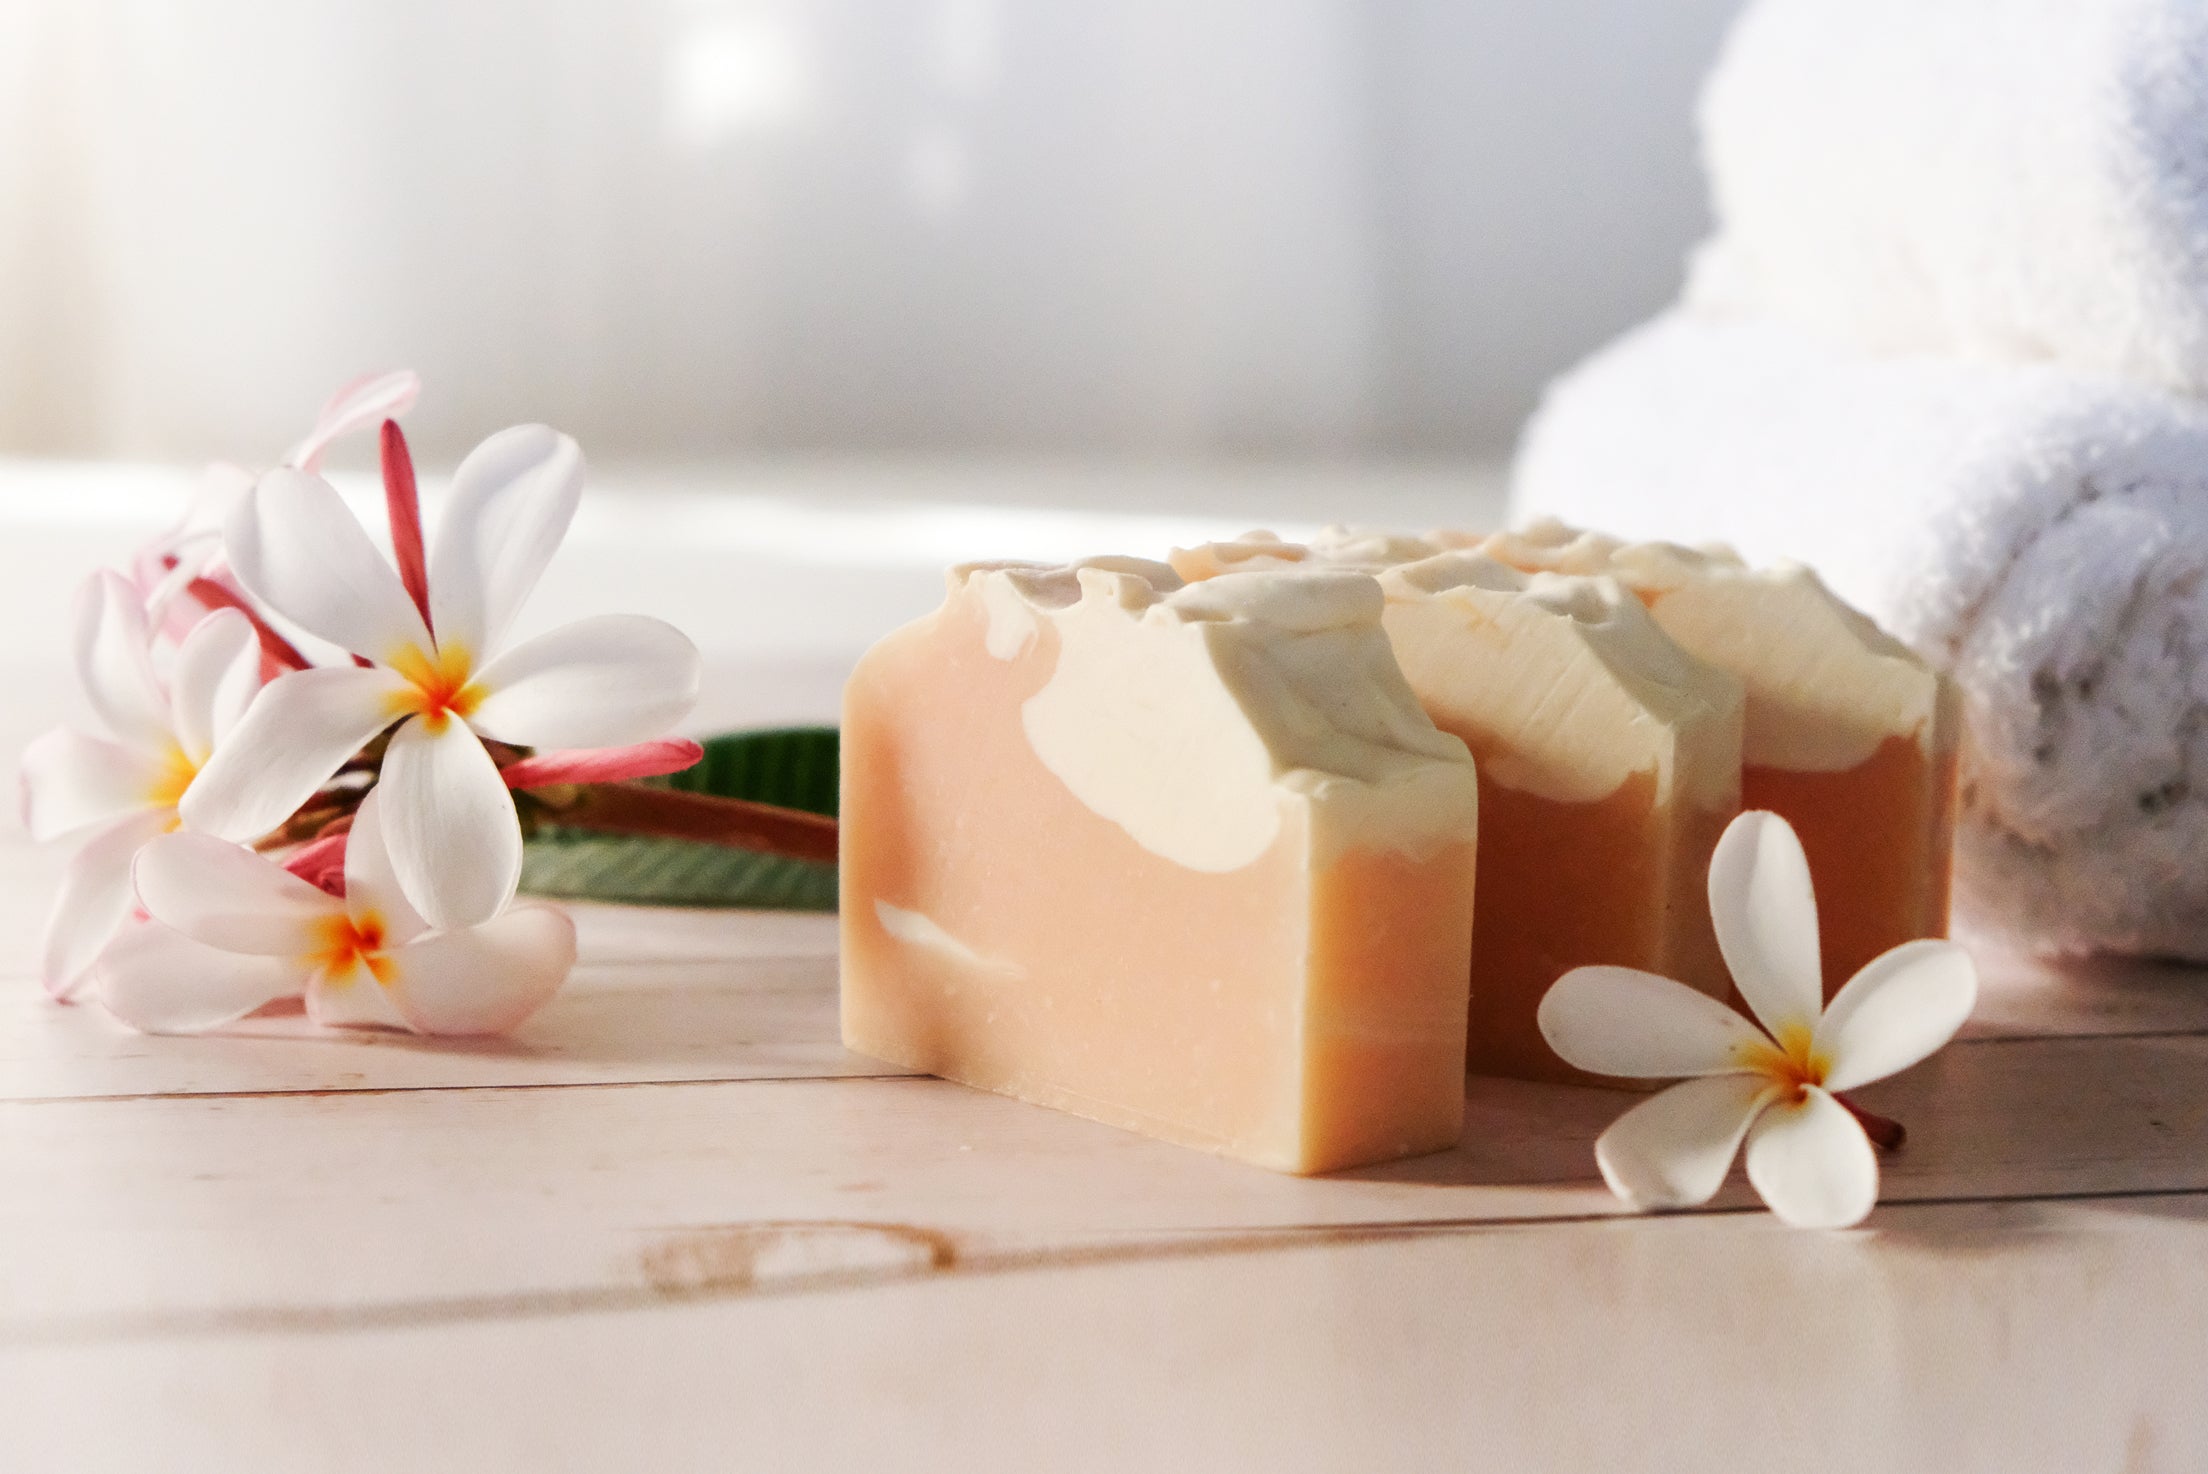 Homemade Soap: The Best Natural Homemade Soaps